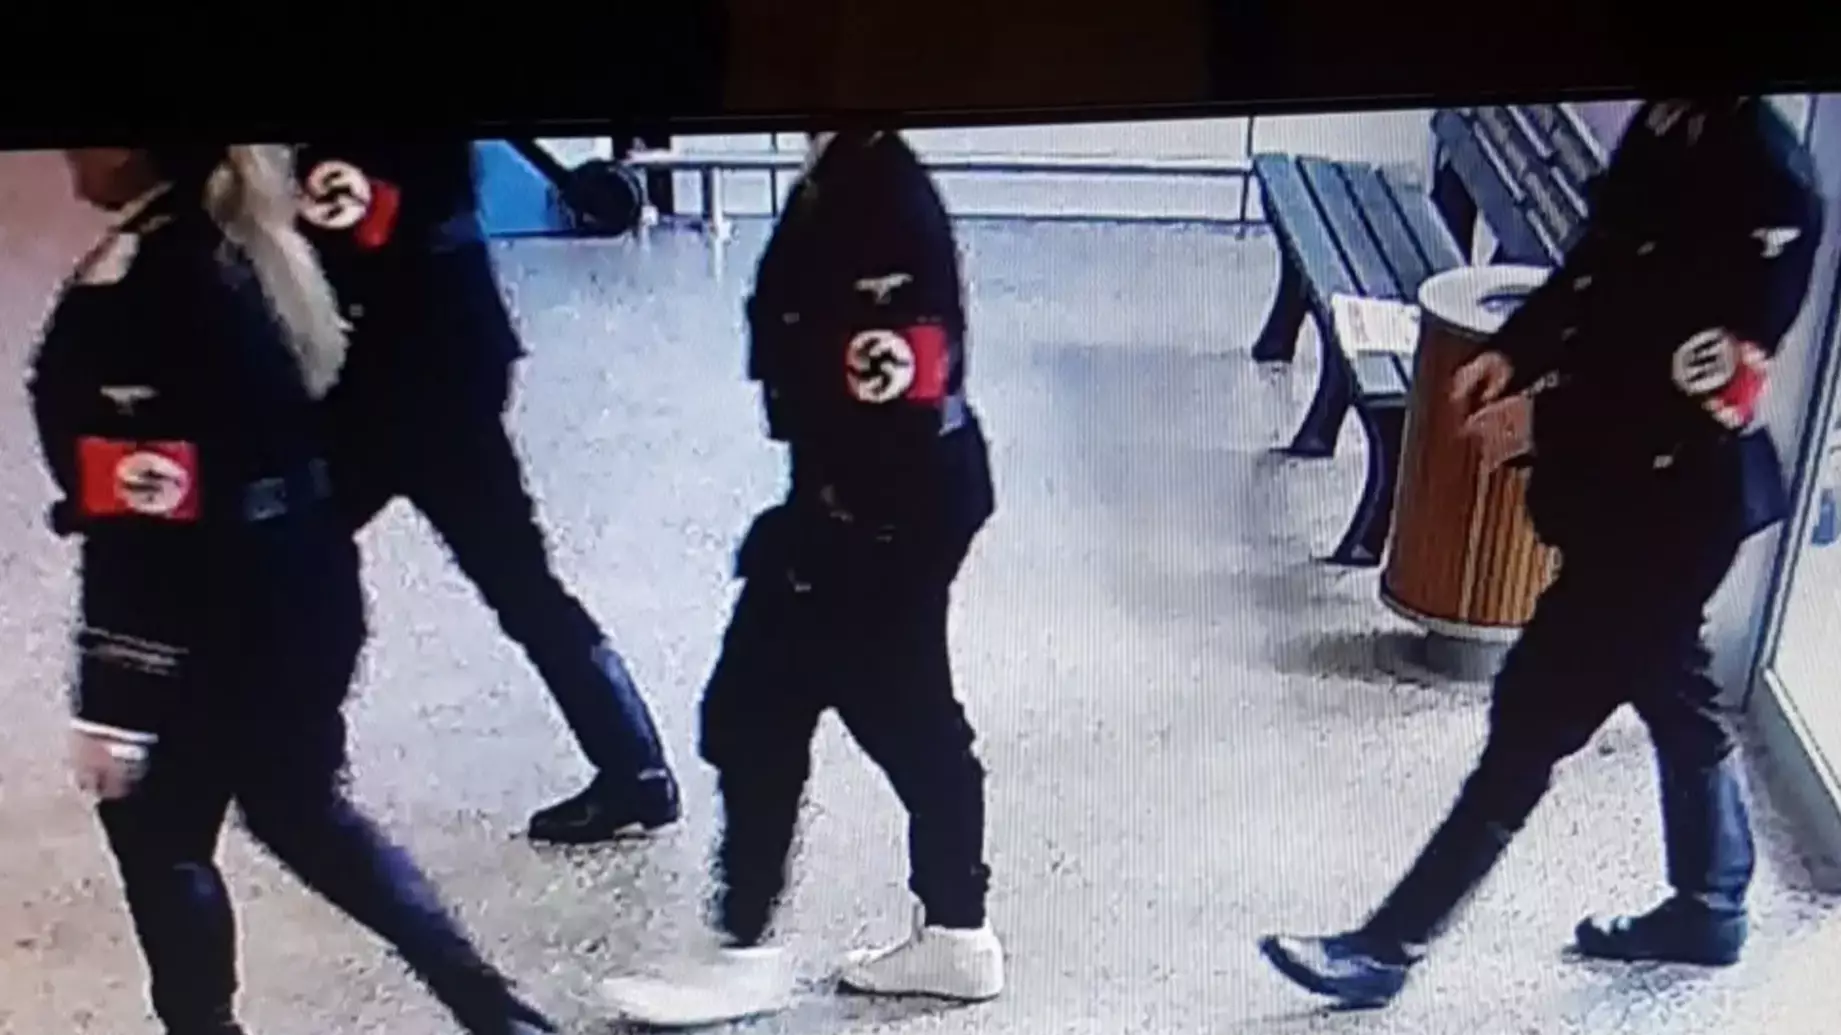 Group Sparks Outrage After Walking Into Coles Supermarket In Nazi Uniforms